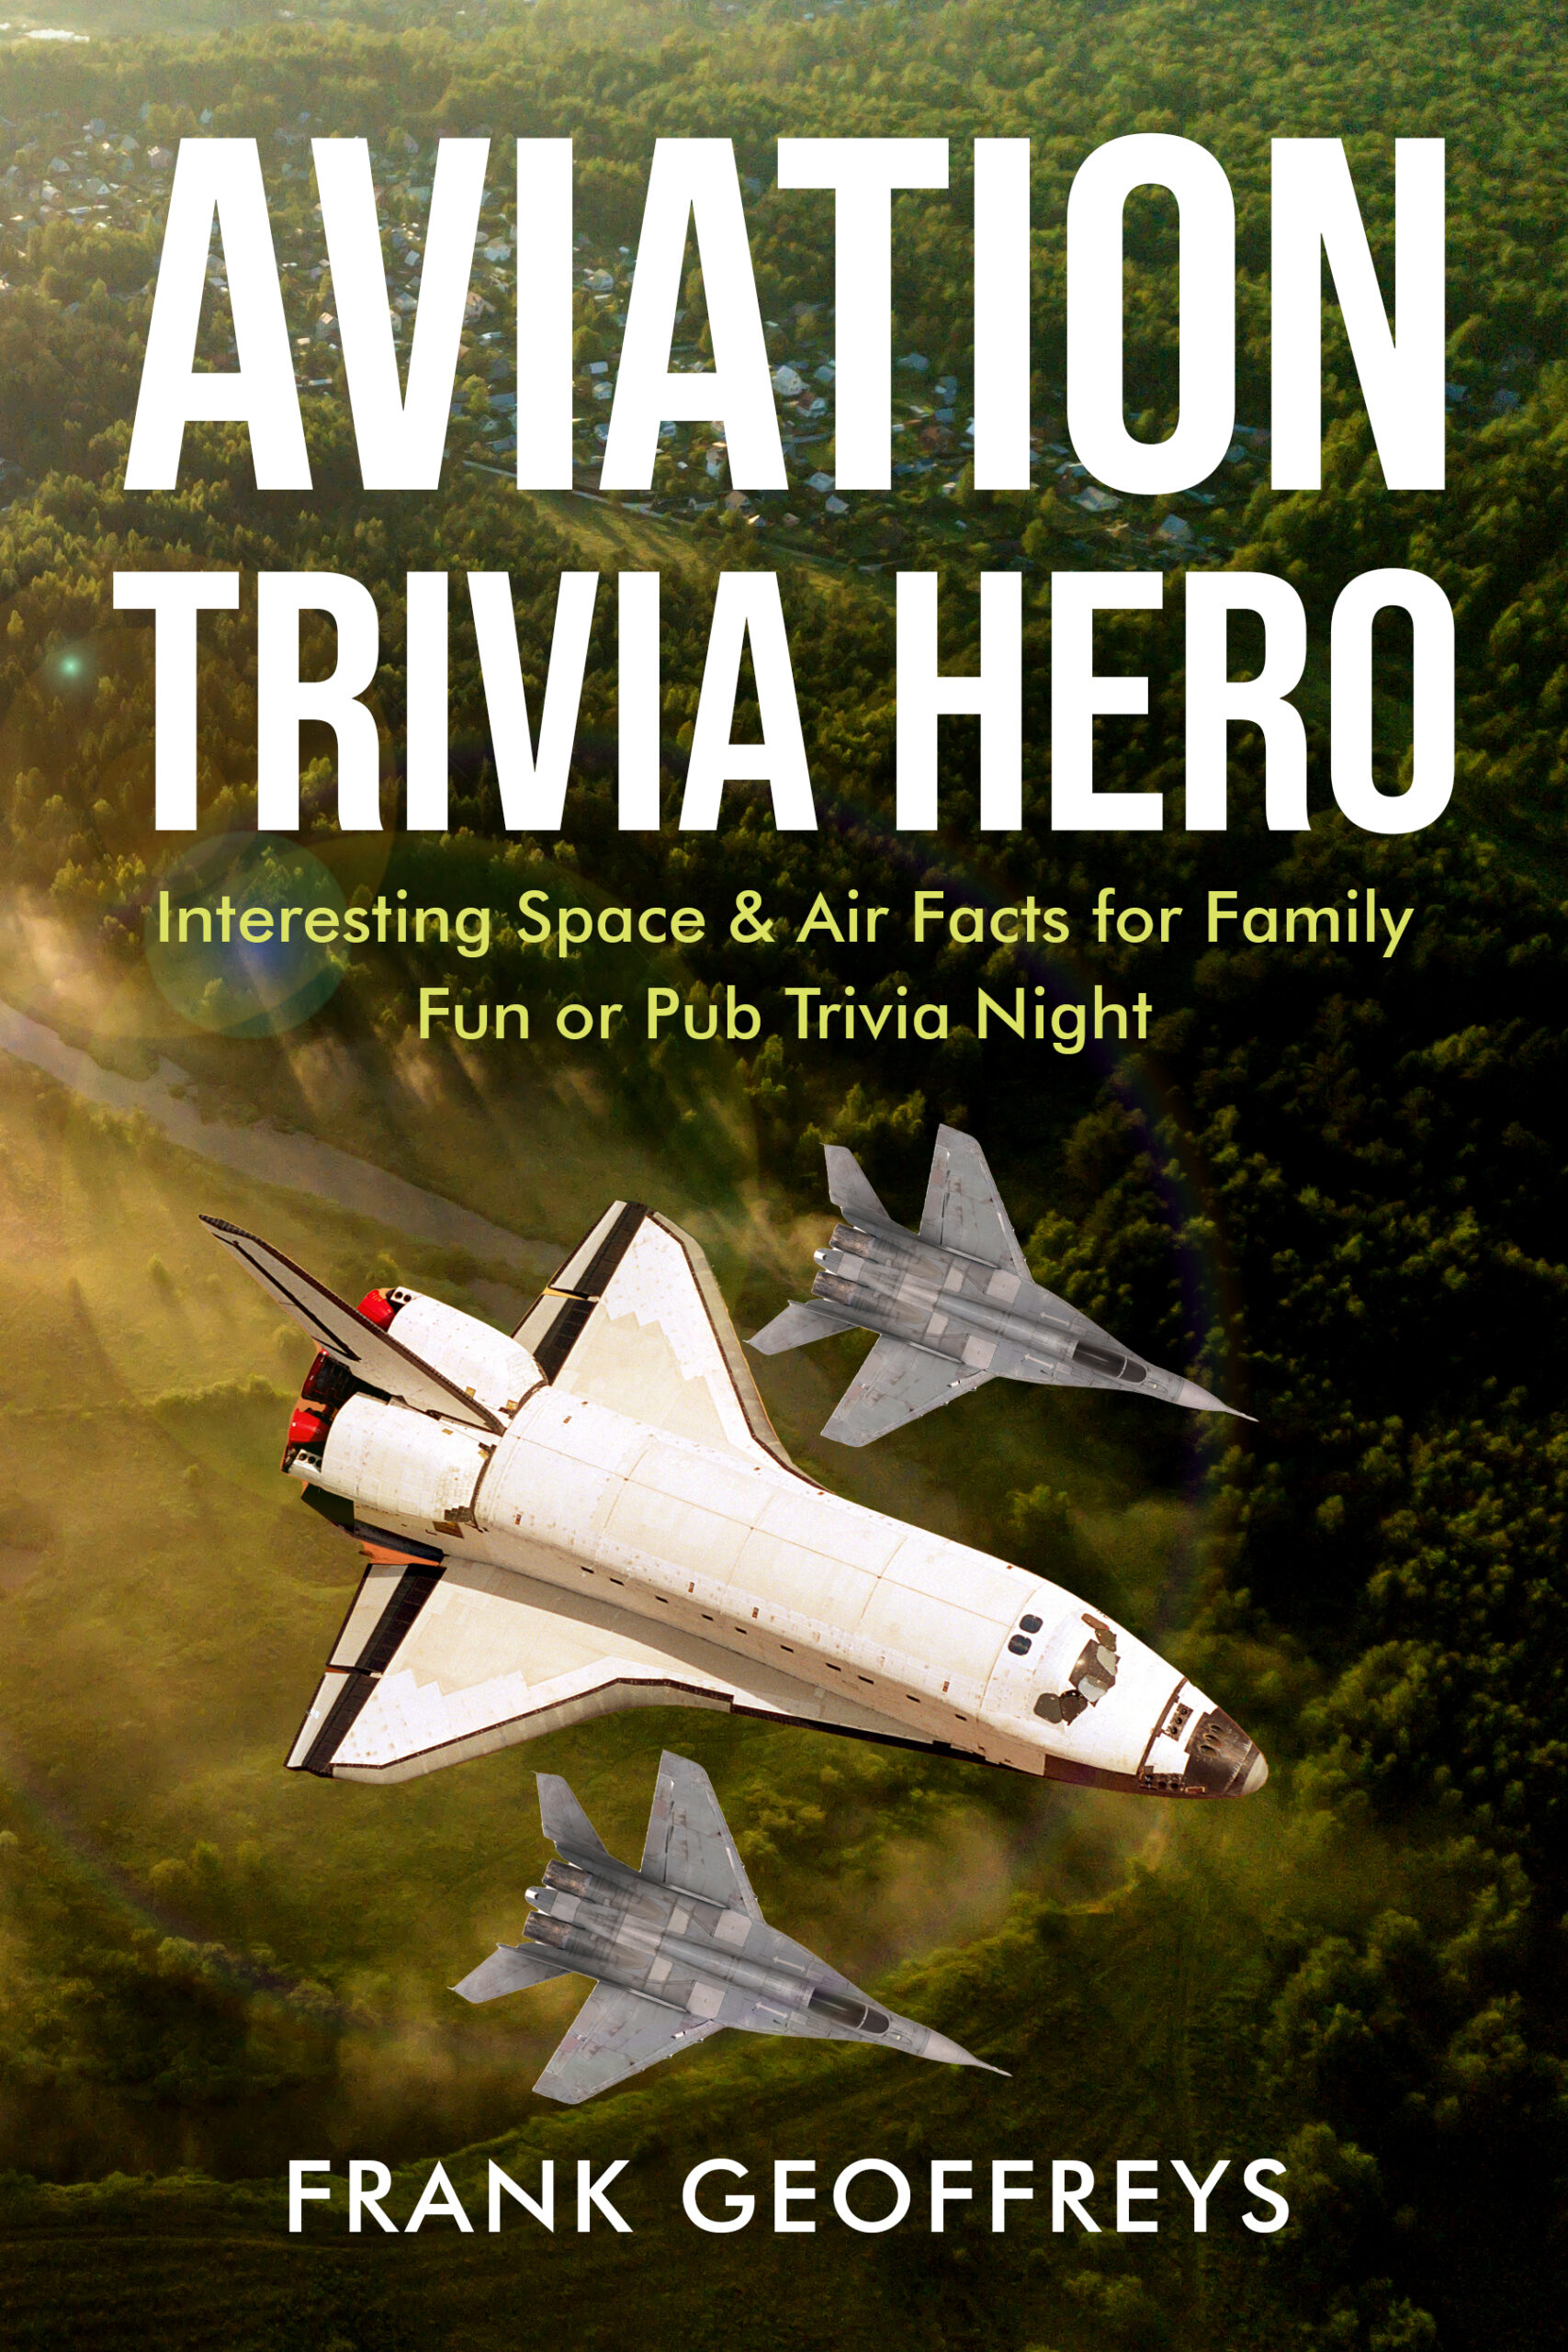 FREE: Aviation Trivia Hero: Interesting Space & Air Facts for Family Fun or Pub Trivia Night by Frank Geoffreys